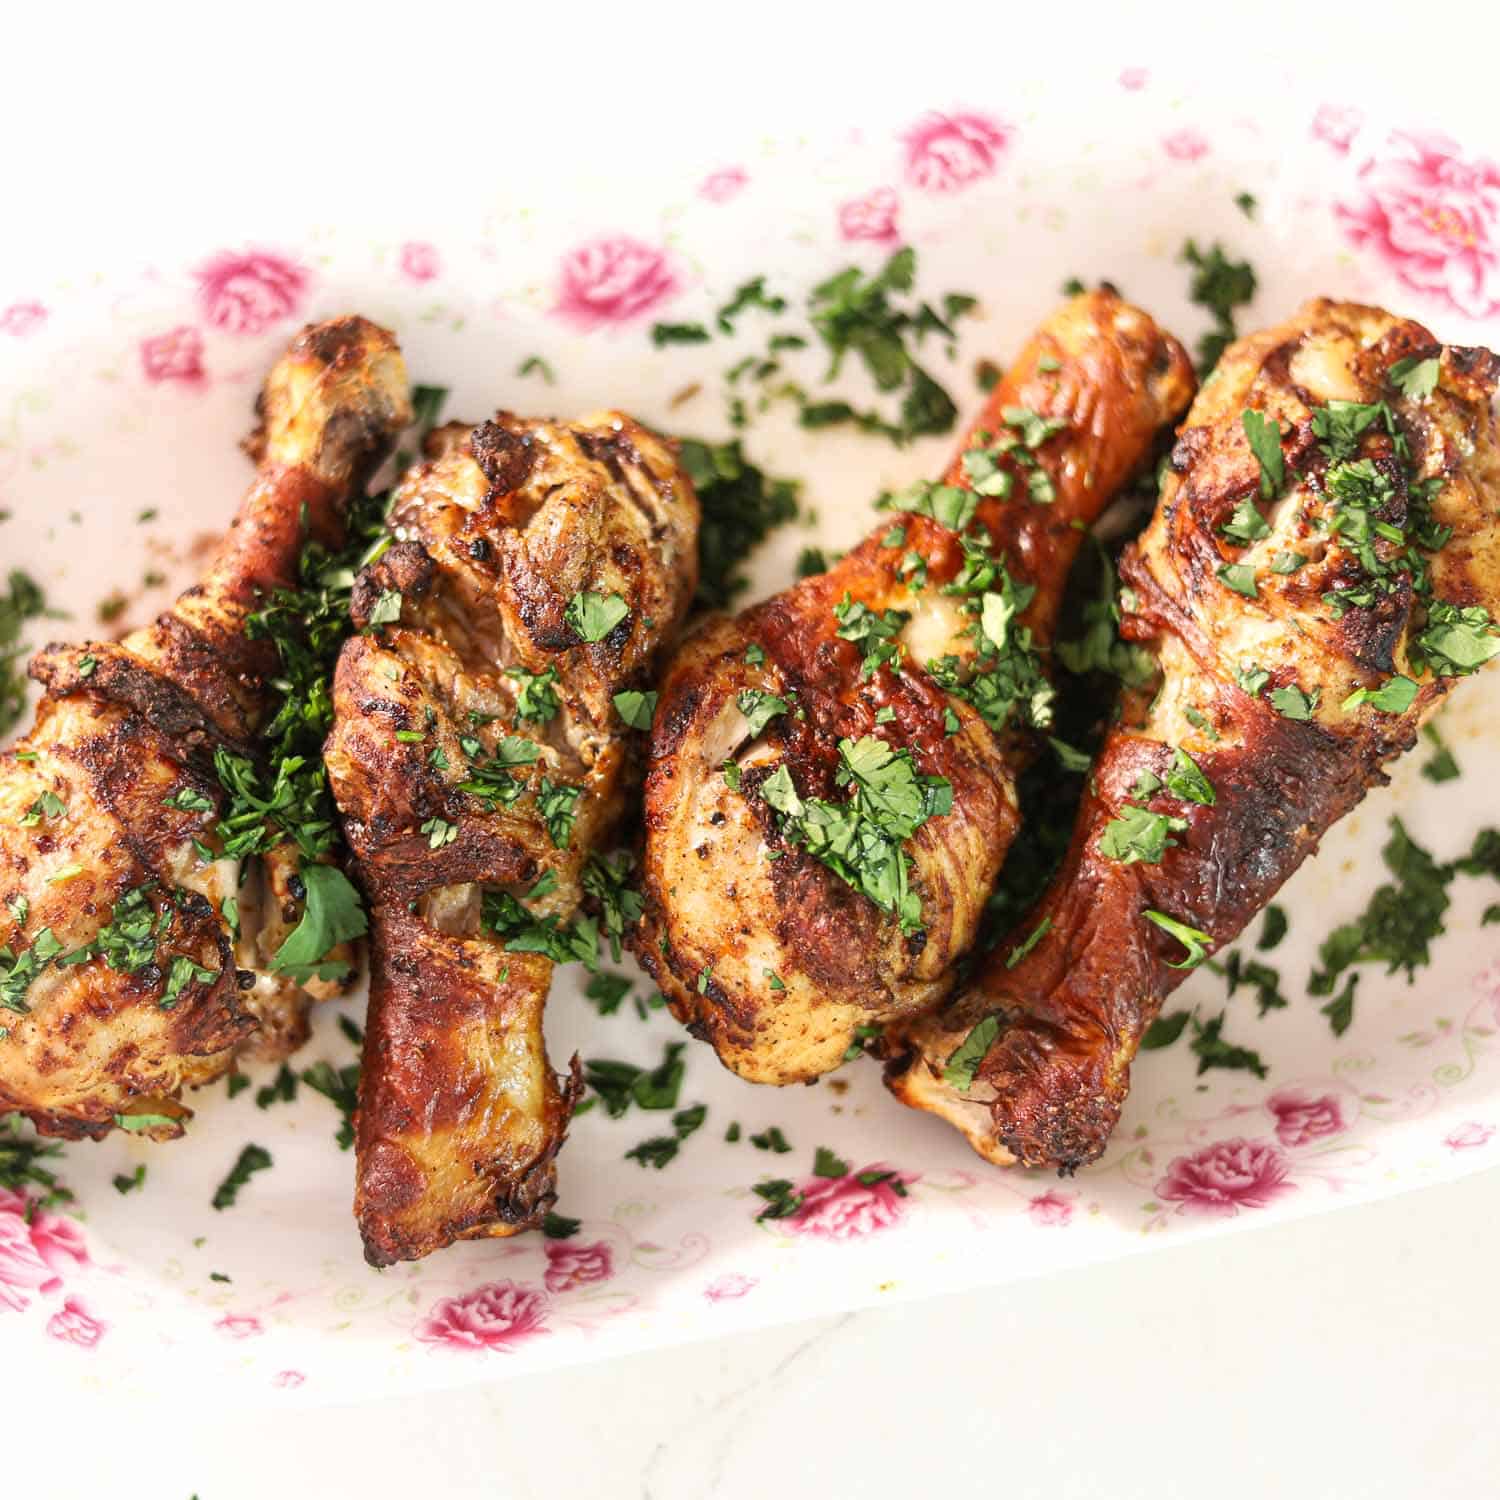 Masala Chicken Legs Recipe cooked in the Air Fryer on a plate garnished with chopped cilantro leaves.